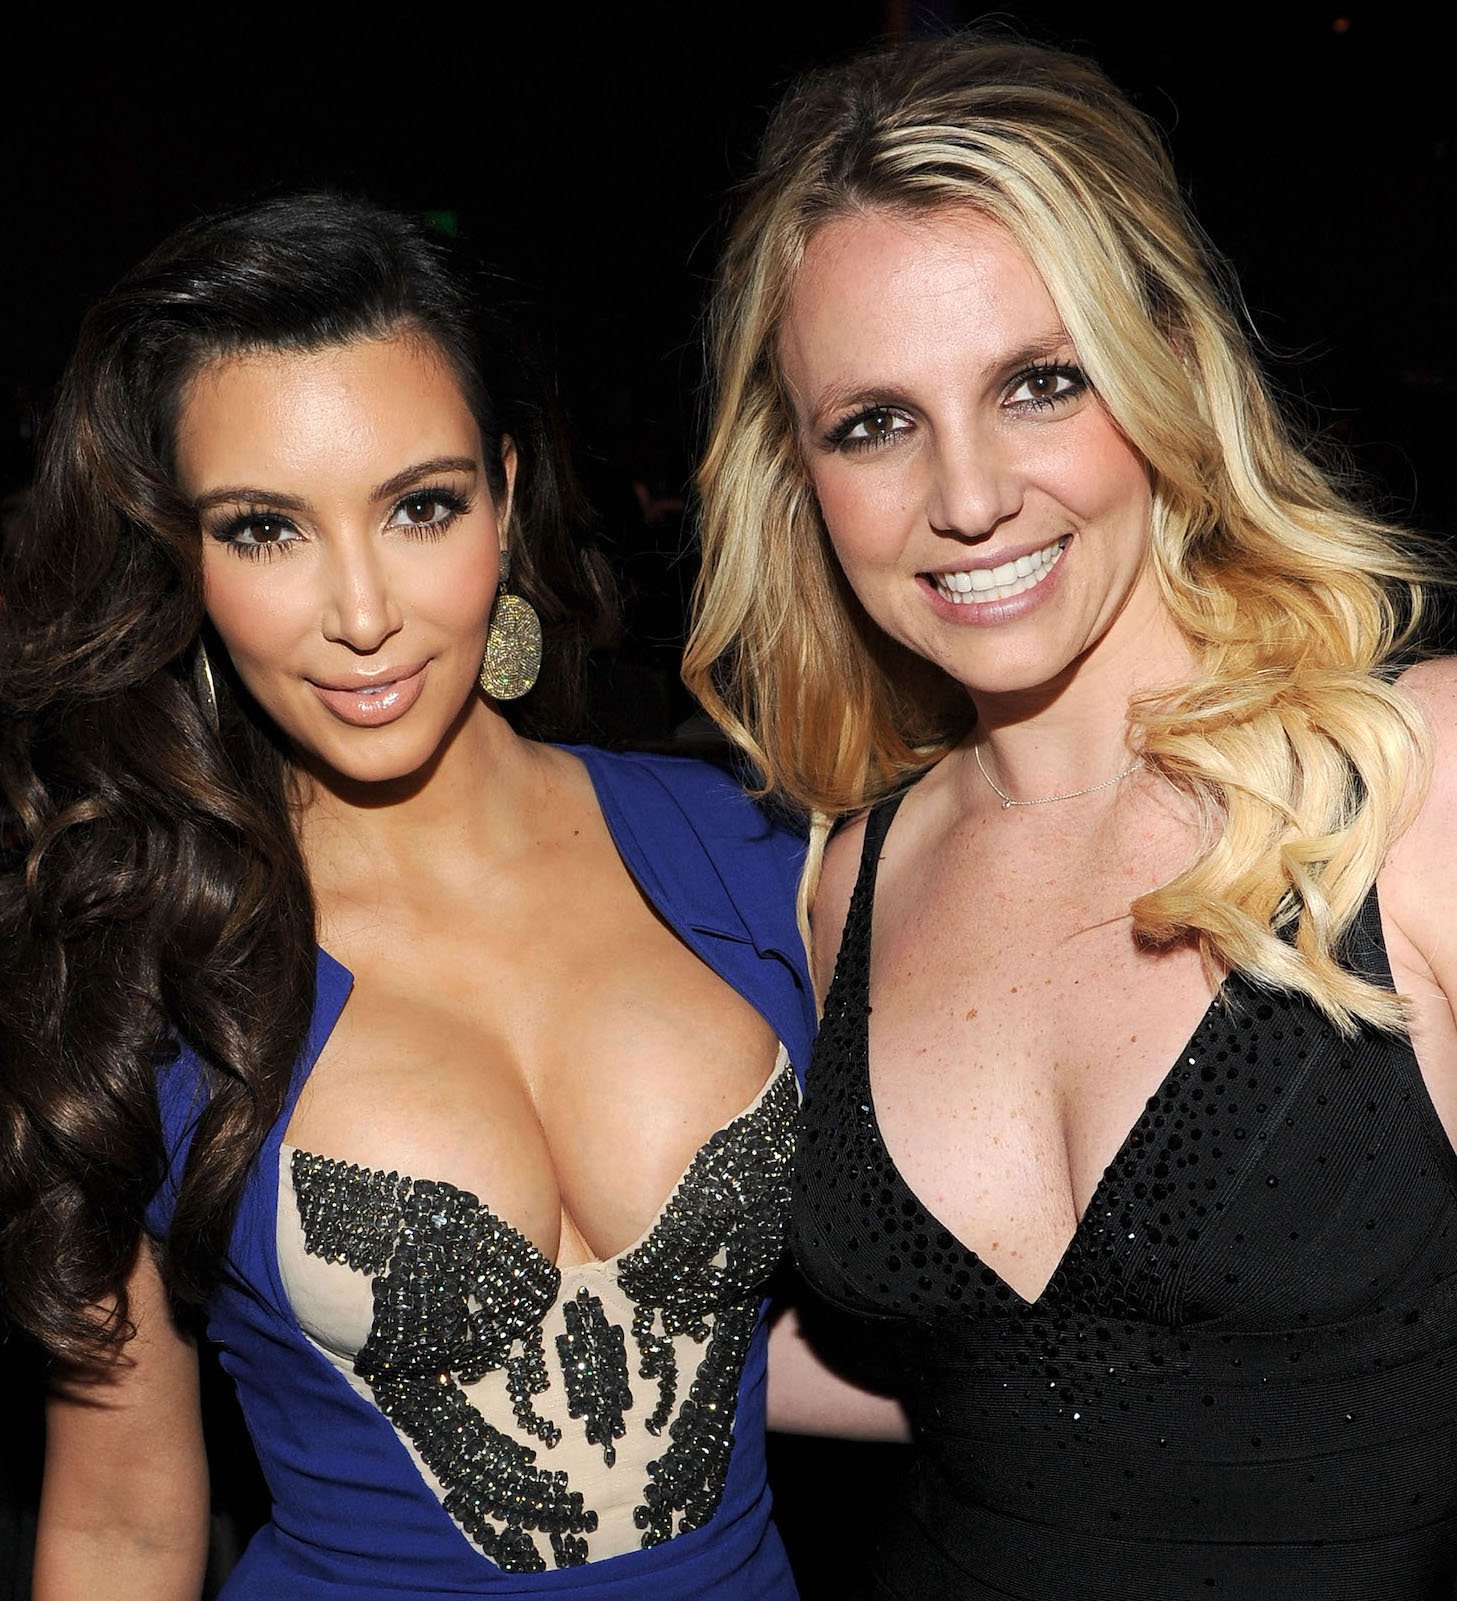 Kim Kardashian West and Britney Spears attending Clive Davis And The Recording Academy's 2012 Pre-GRAMMY Gala